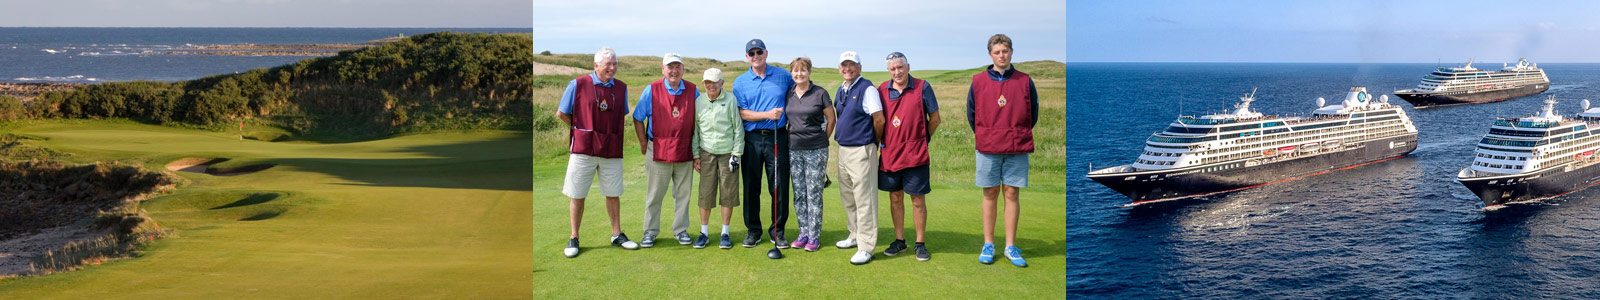 PerryGolf leading provider of golf vacations to worldwide destinations